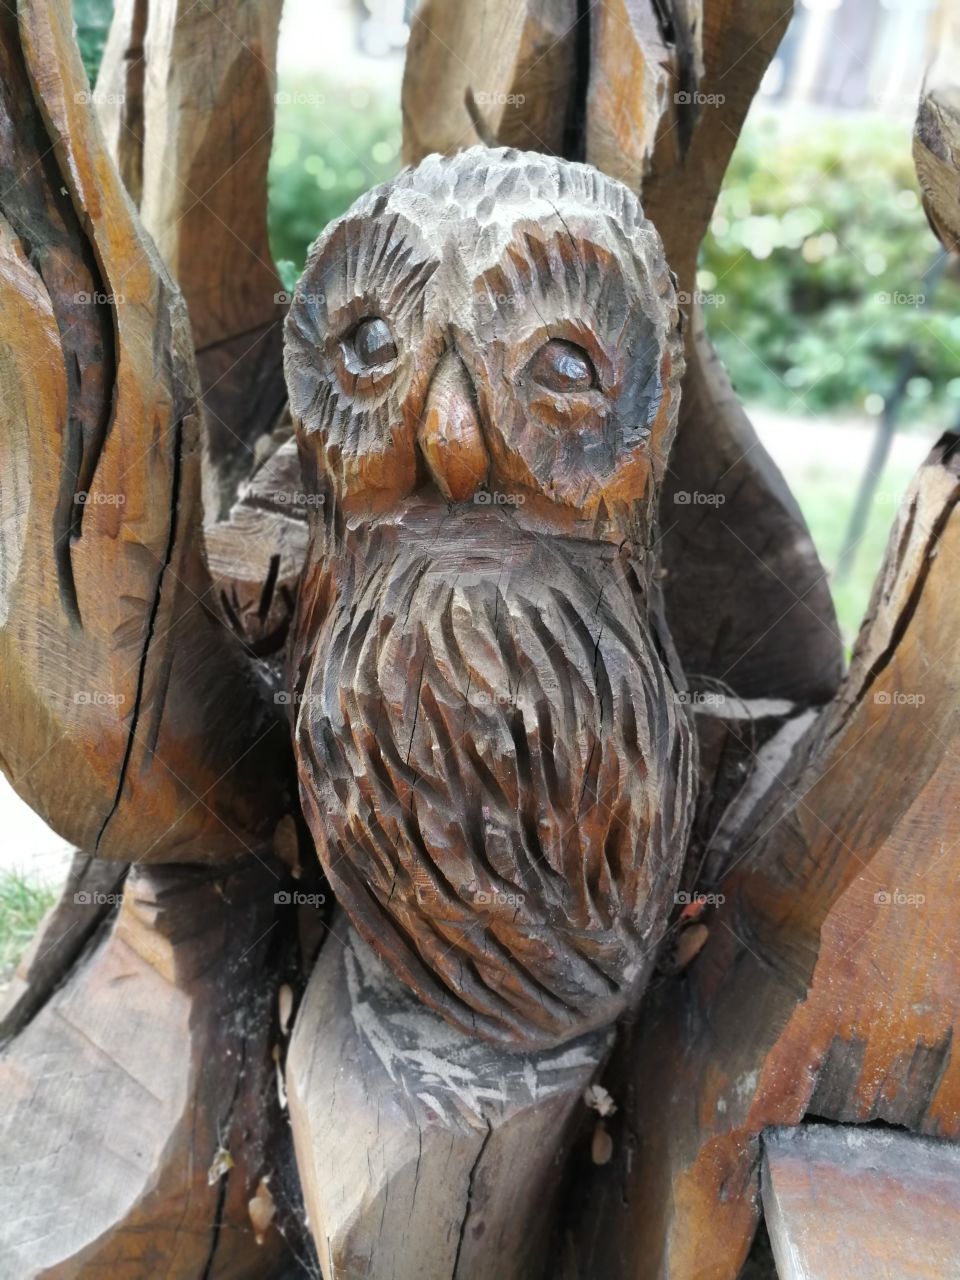 An old wooden figure.